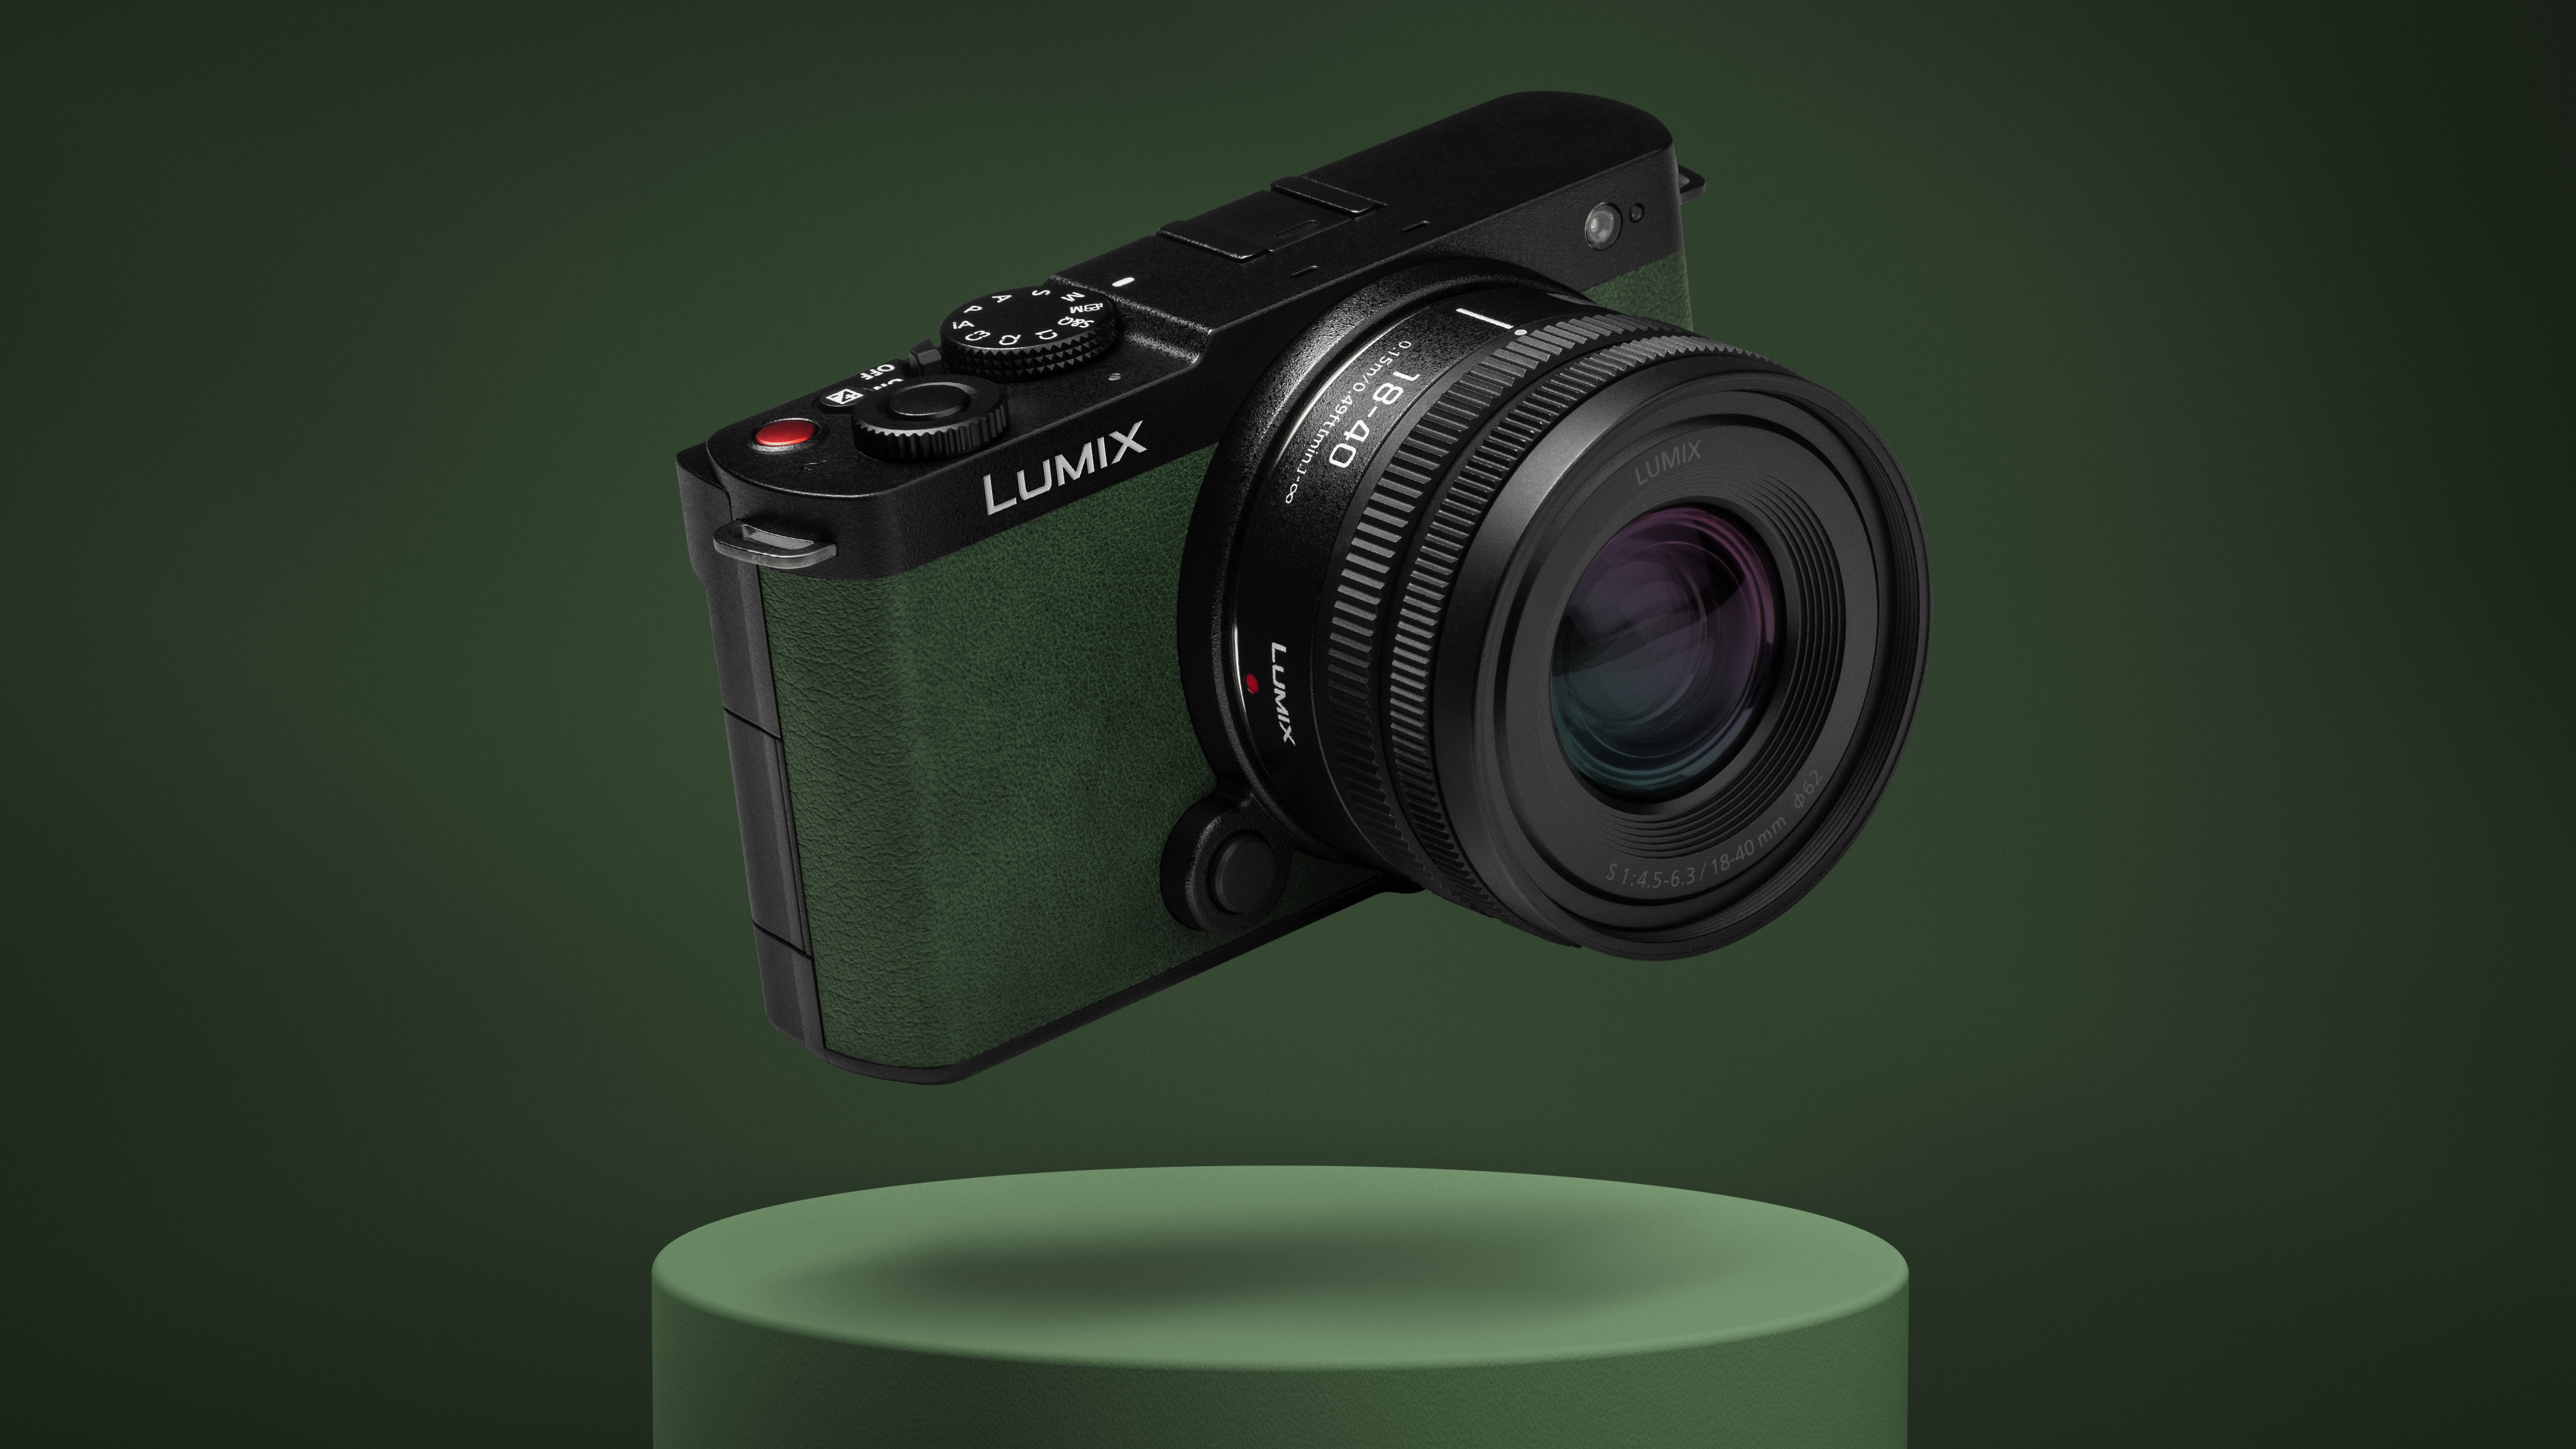 Panasonic Lumix S9 in Dark Olive color on an olive background